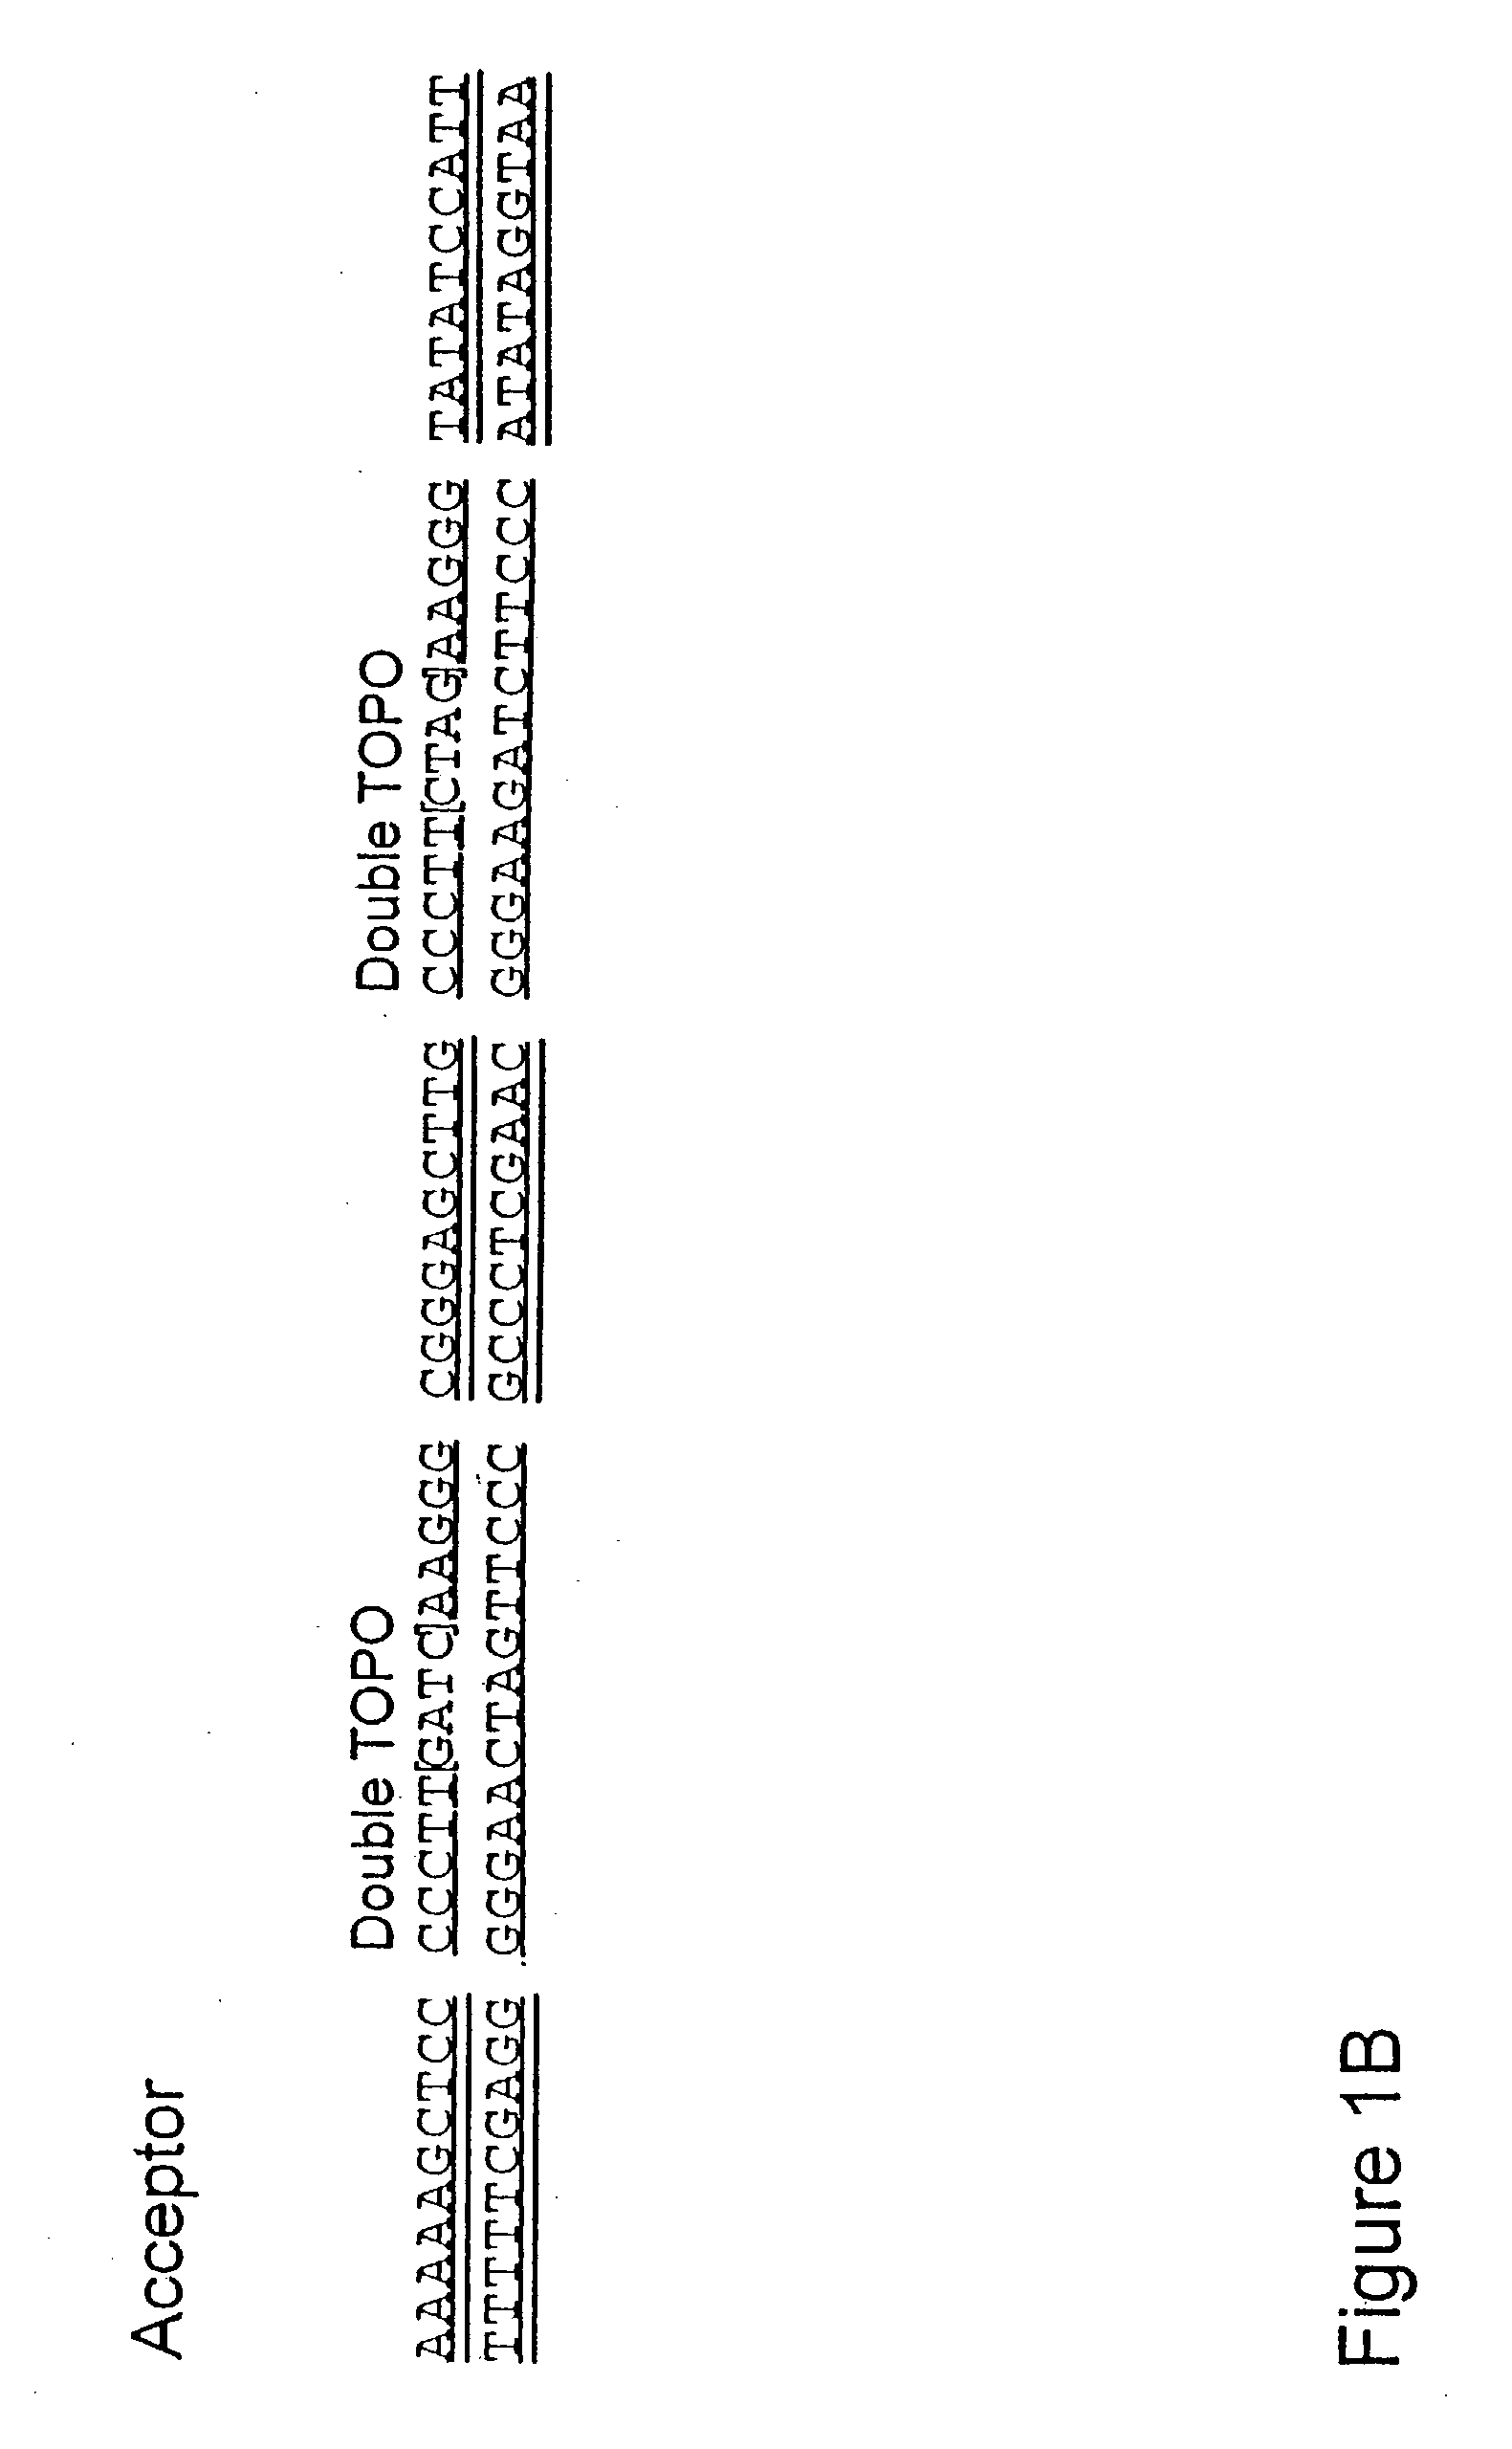 System for the rapid manipulation of nucleic acid sequences